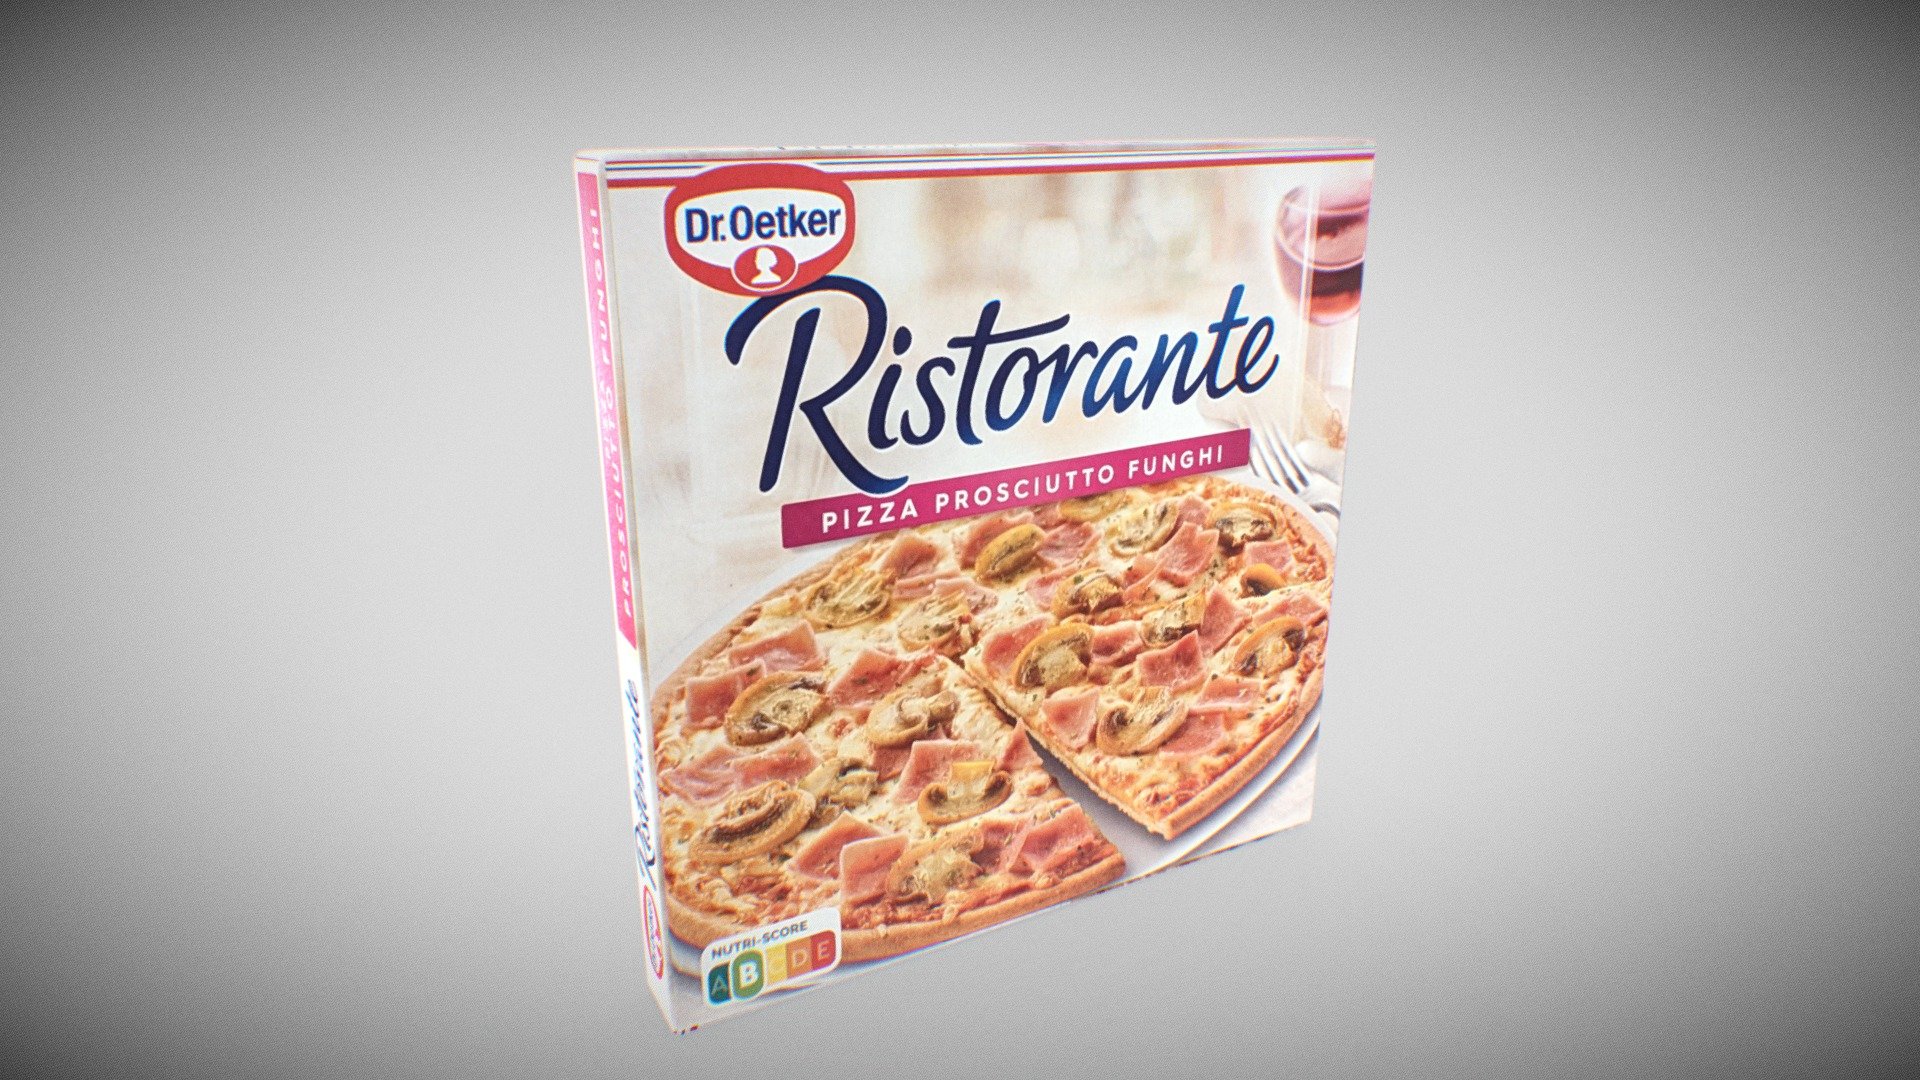 3D Model of Dr. Oetker Ristorante Prosciutto Funghi (Frozen) Pizza Box

The model is low-poly, full-scale, real photos texture with my phone.

Hope you enjoy it 3d model